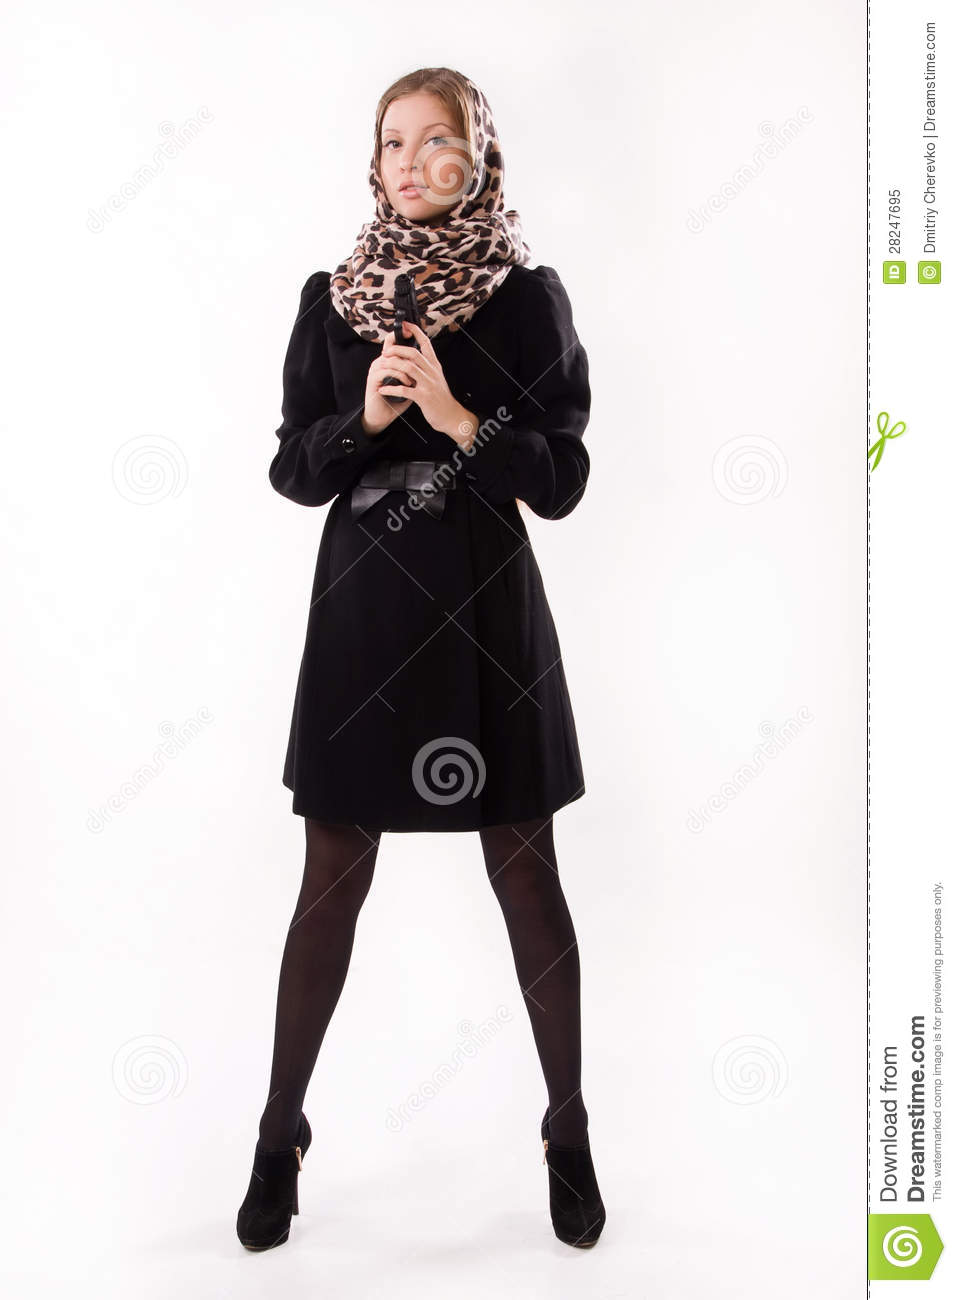 Spy Girl In A Black With Gun Royalty Free Stock Photo   Image